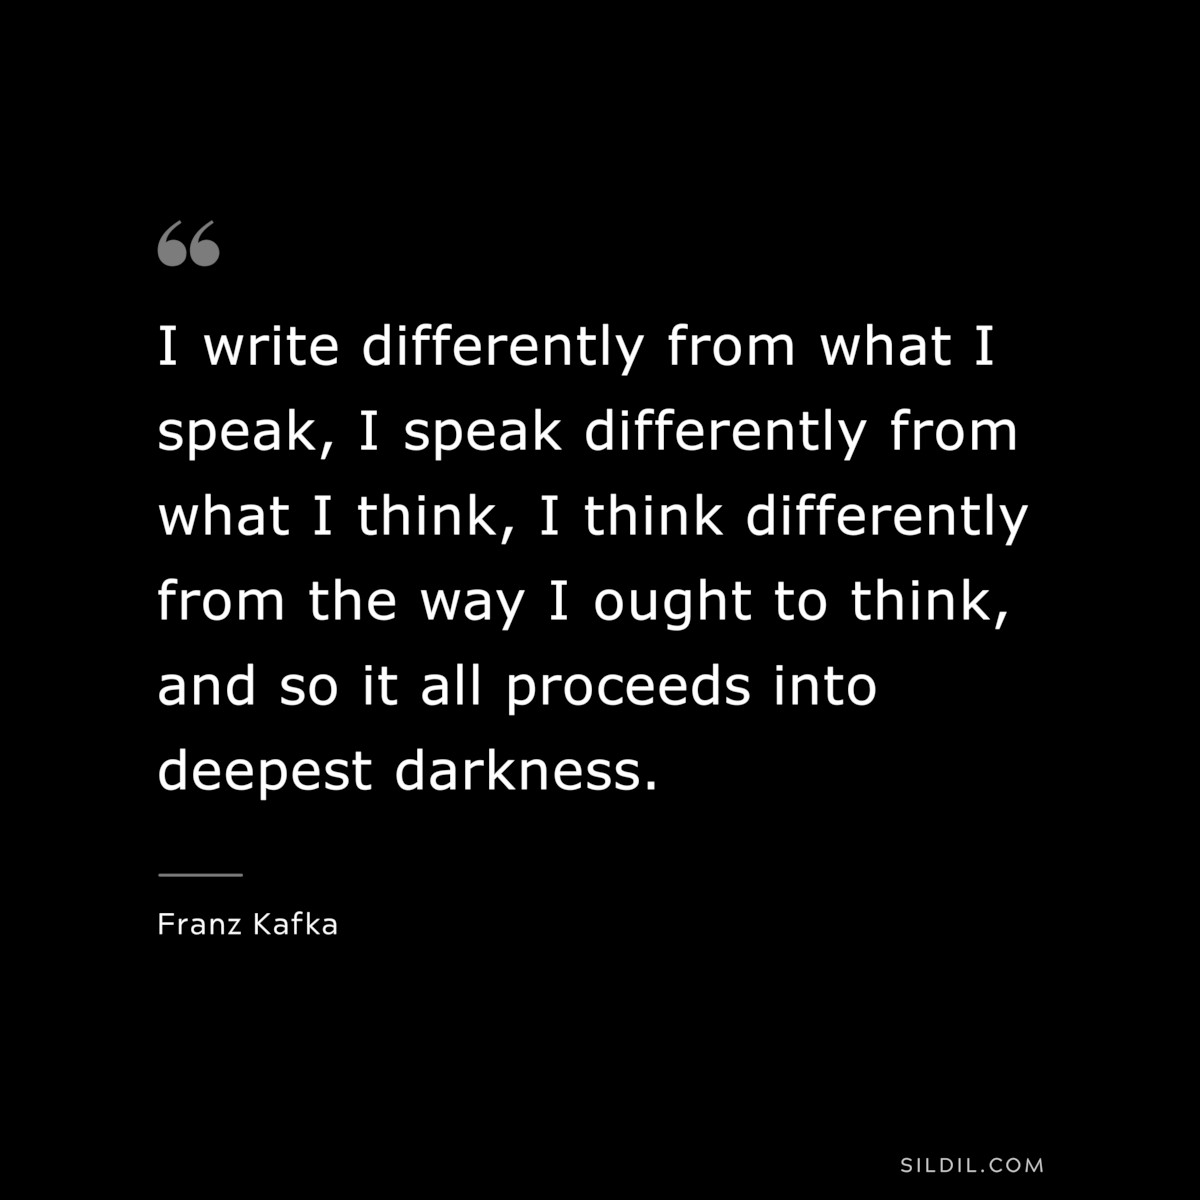 I write differently from what I speak, I speak differently from what I think, I think differently from the way I ought to think, and so it all proceeds into deepest darkness. ― Franz Kafka